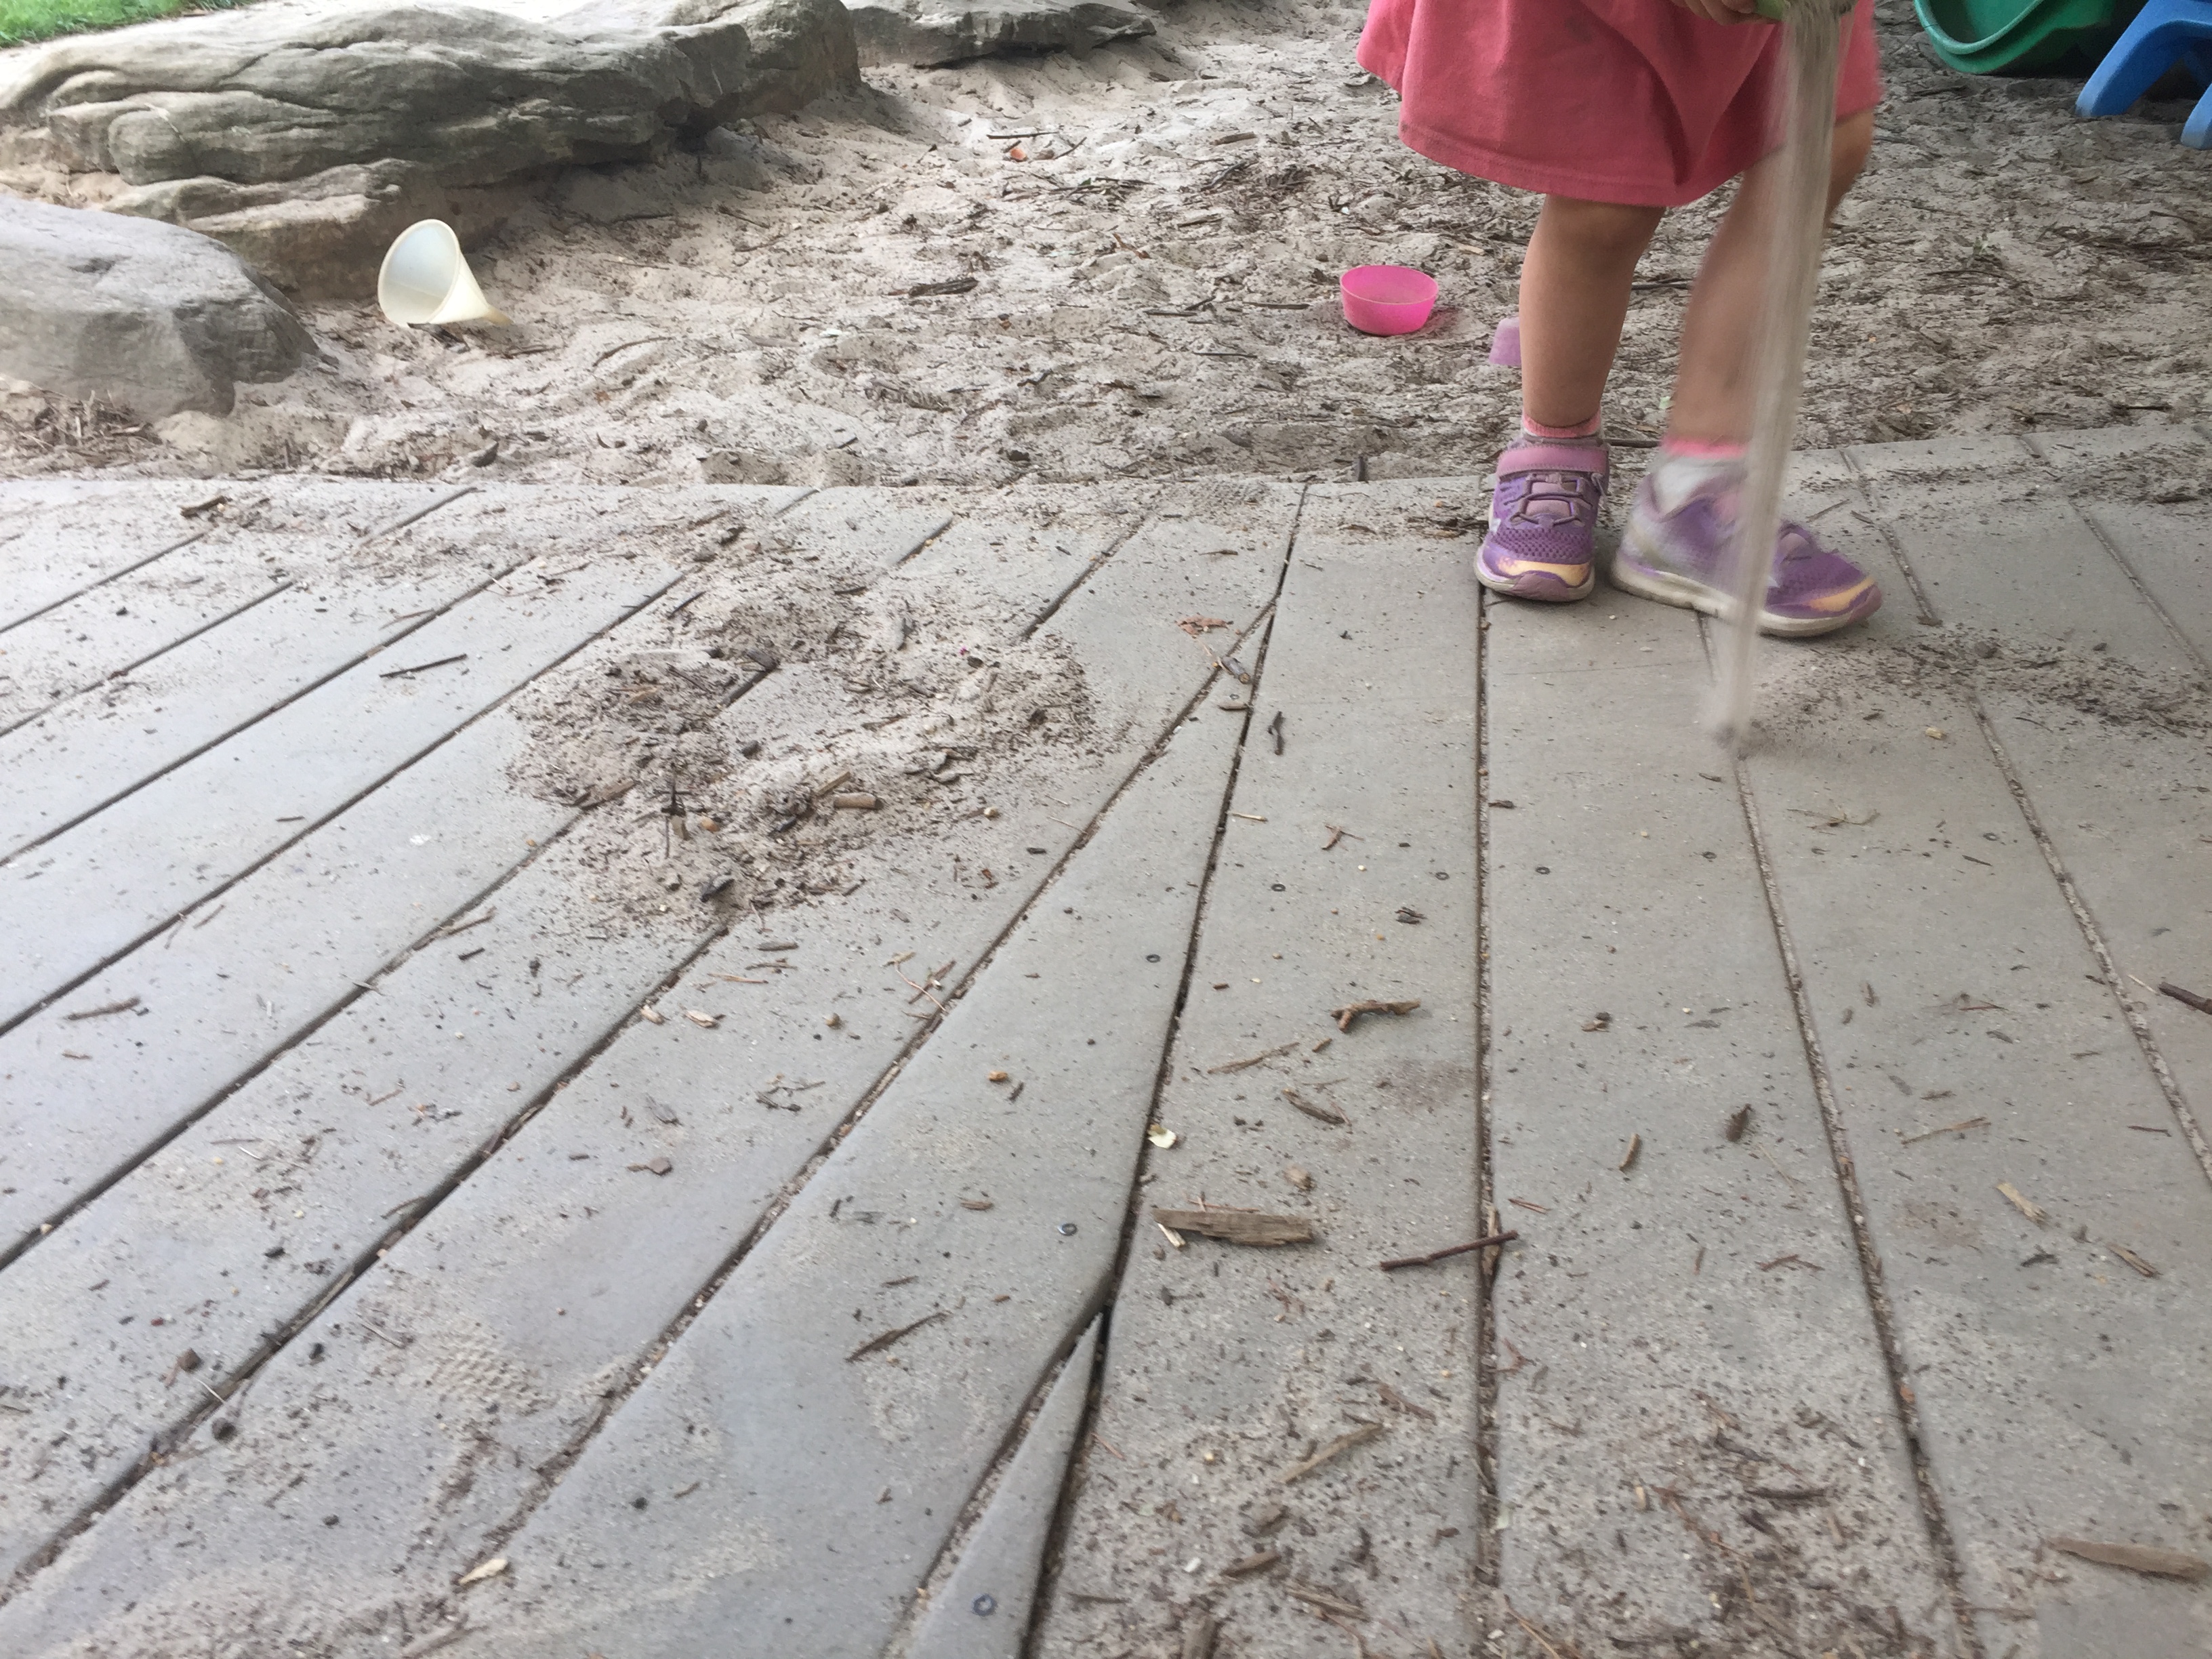 Child pouring dry sand onto the walkway to create lines.